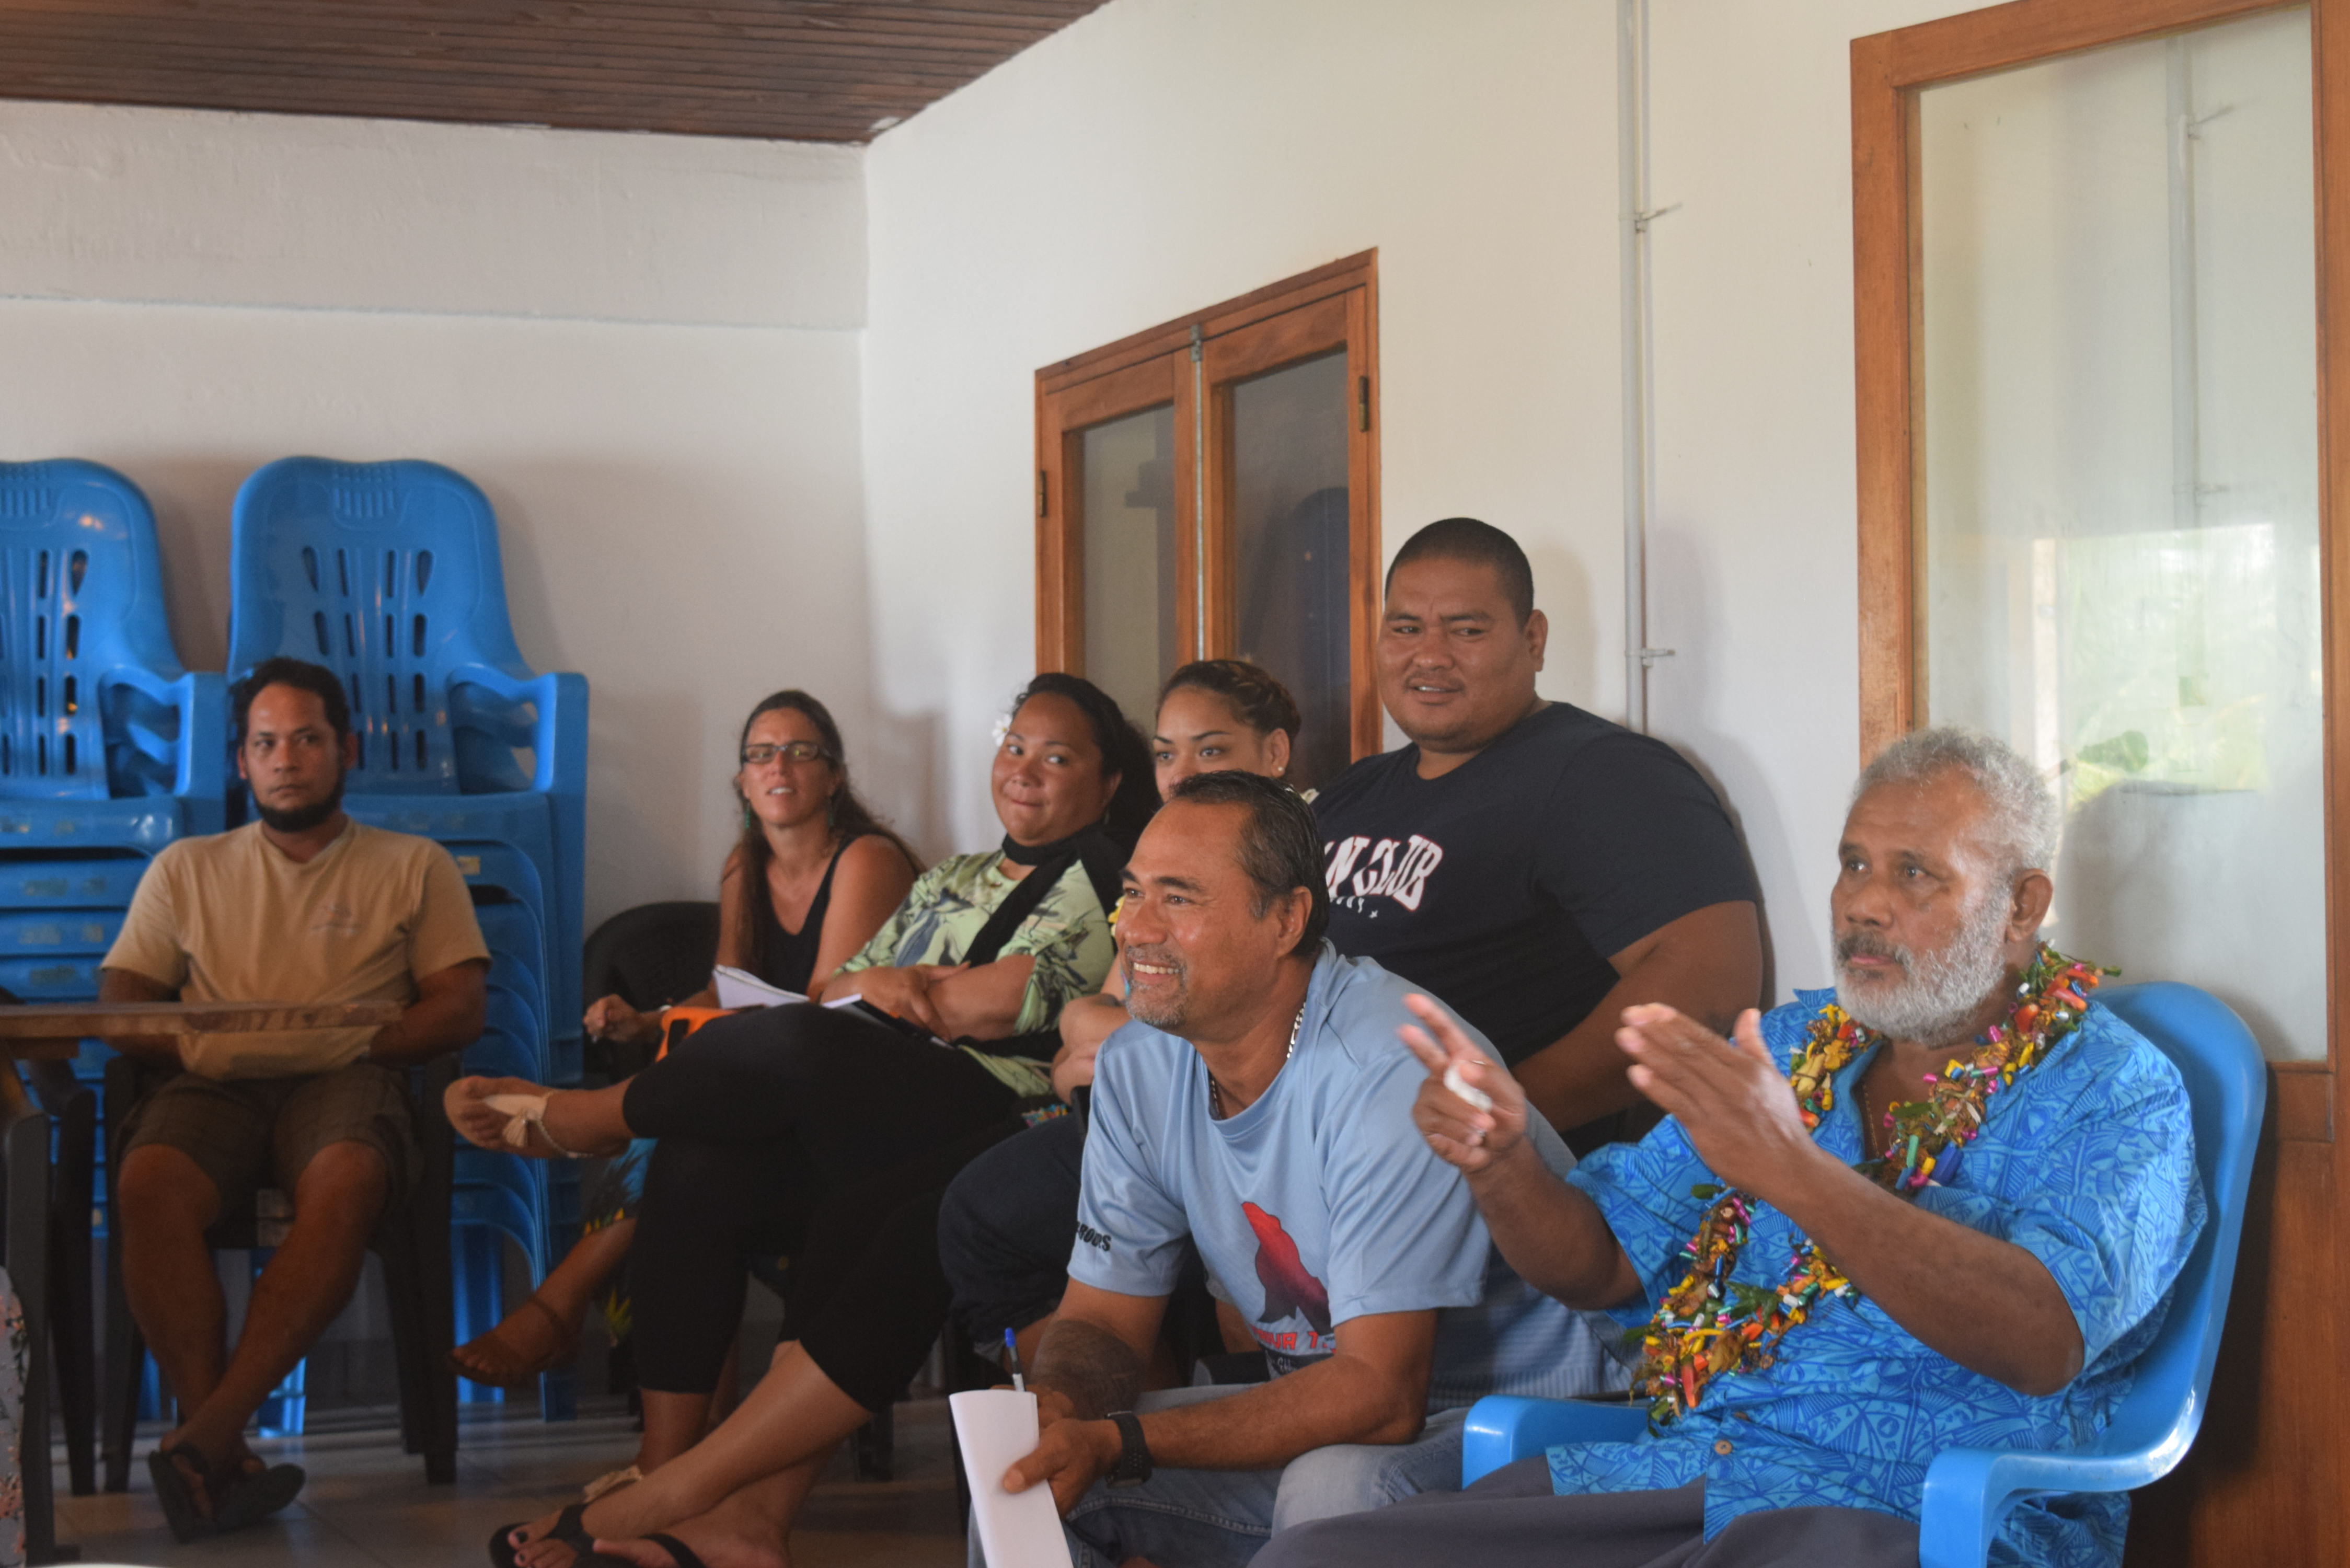 Fishing stakeholders meeting at the fale fono of the Vaitupu village